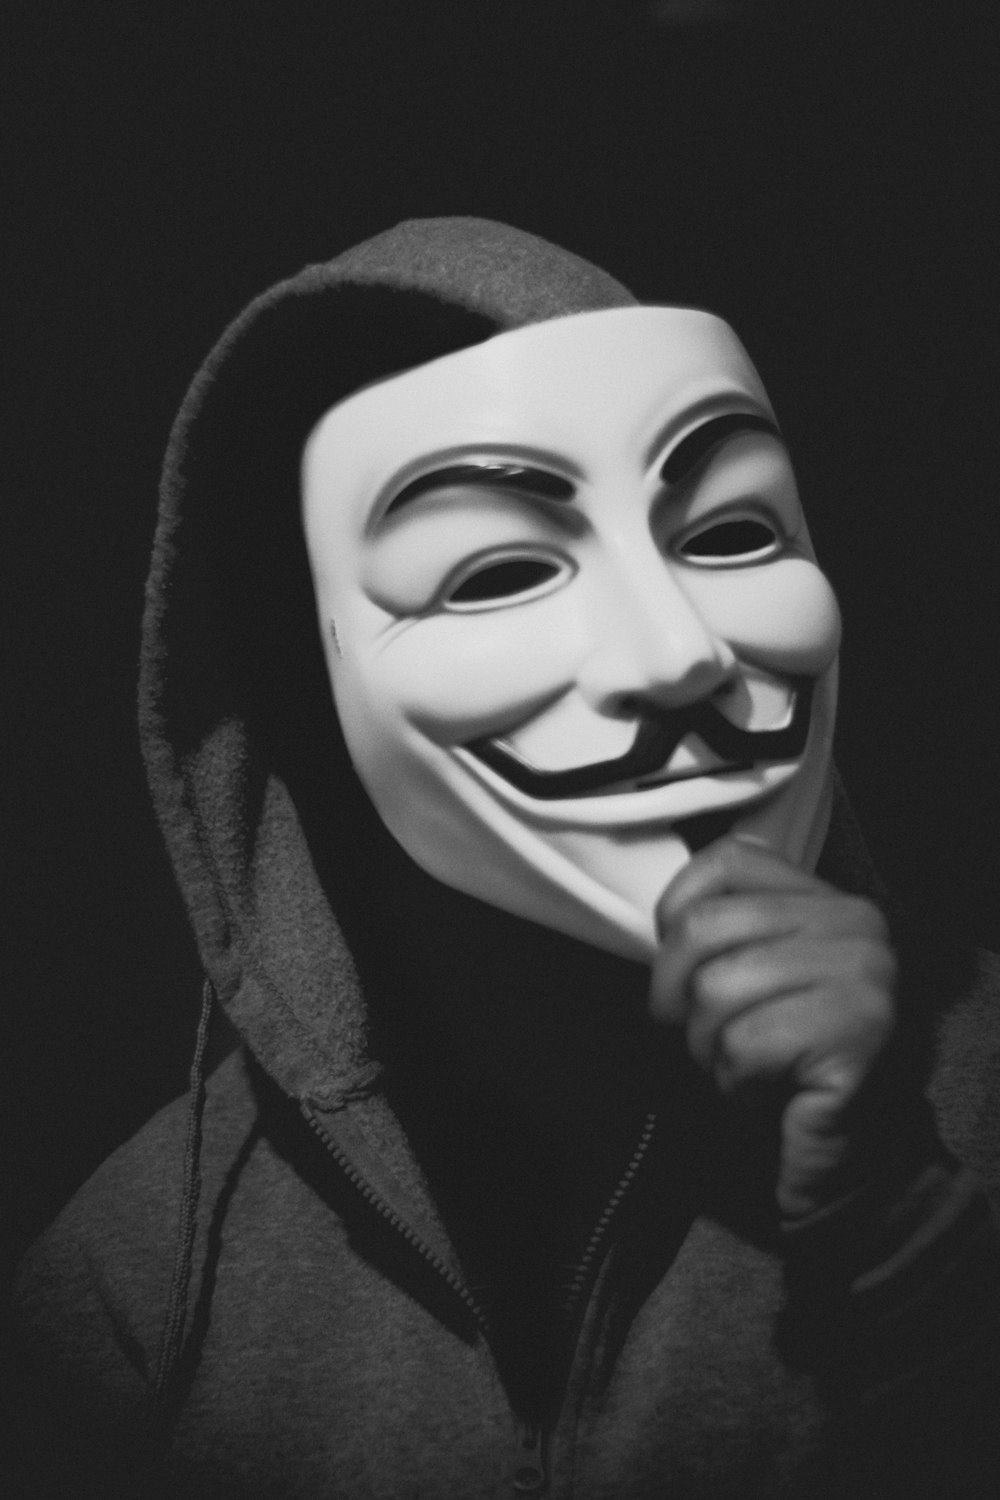 person holding Guy Fawkes mask